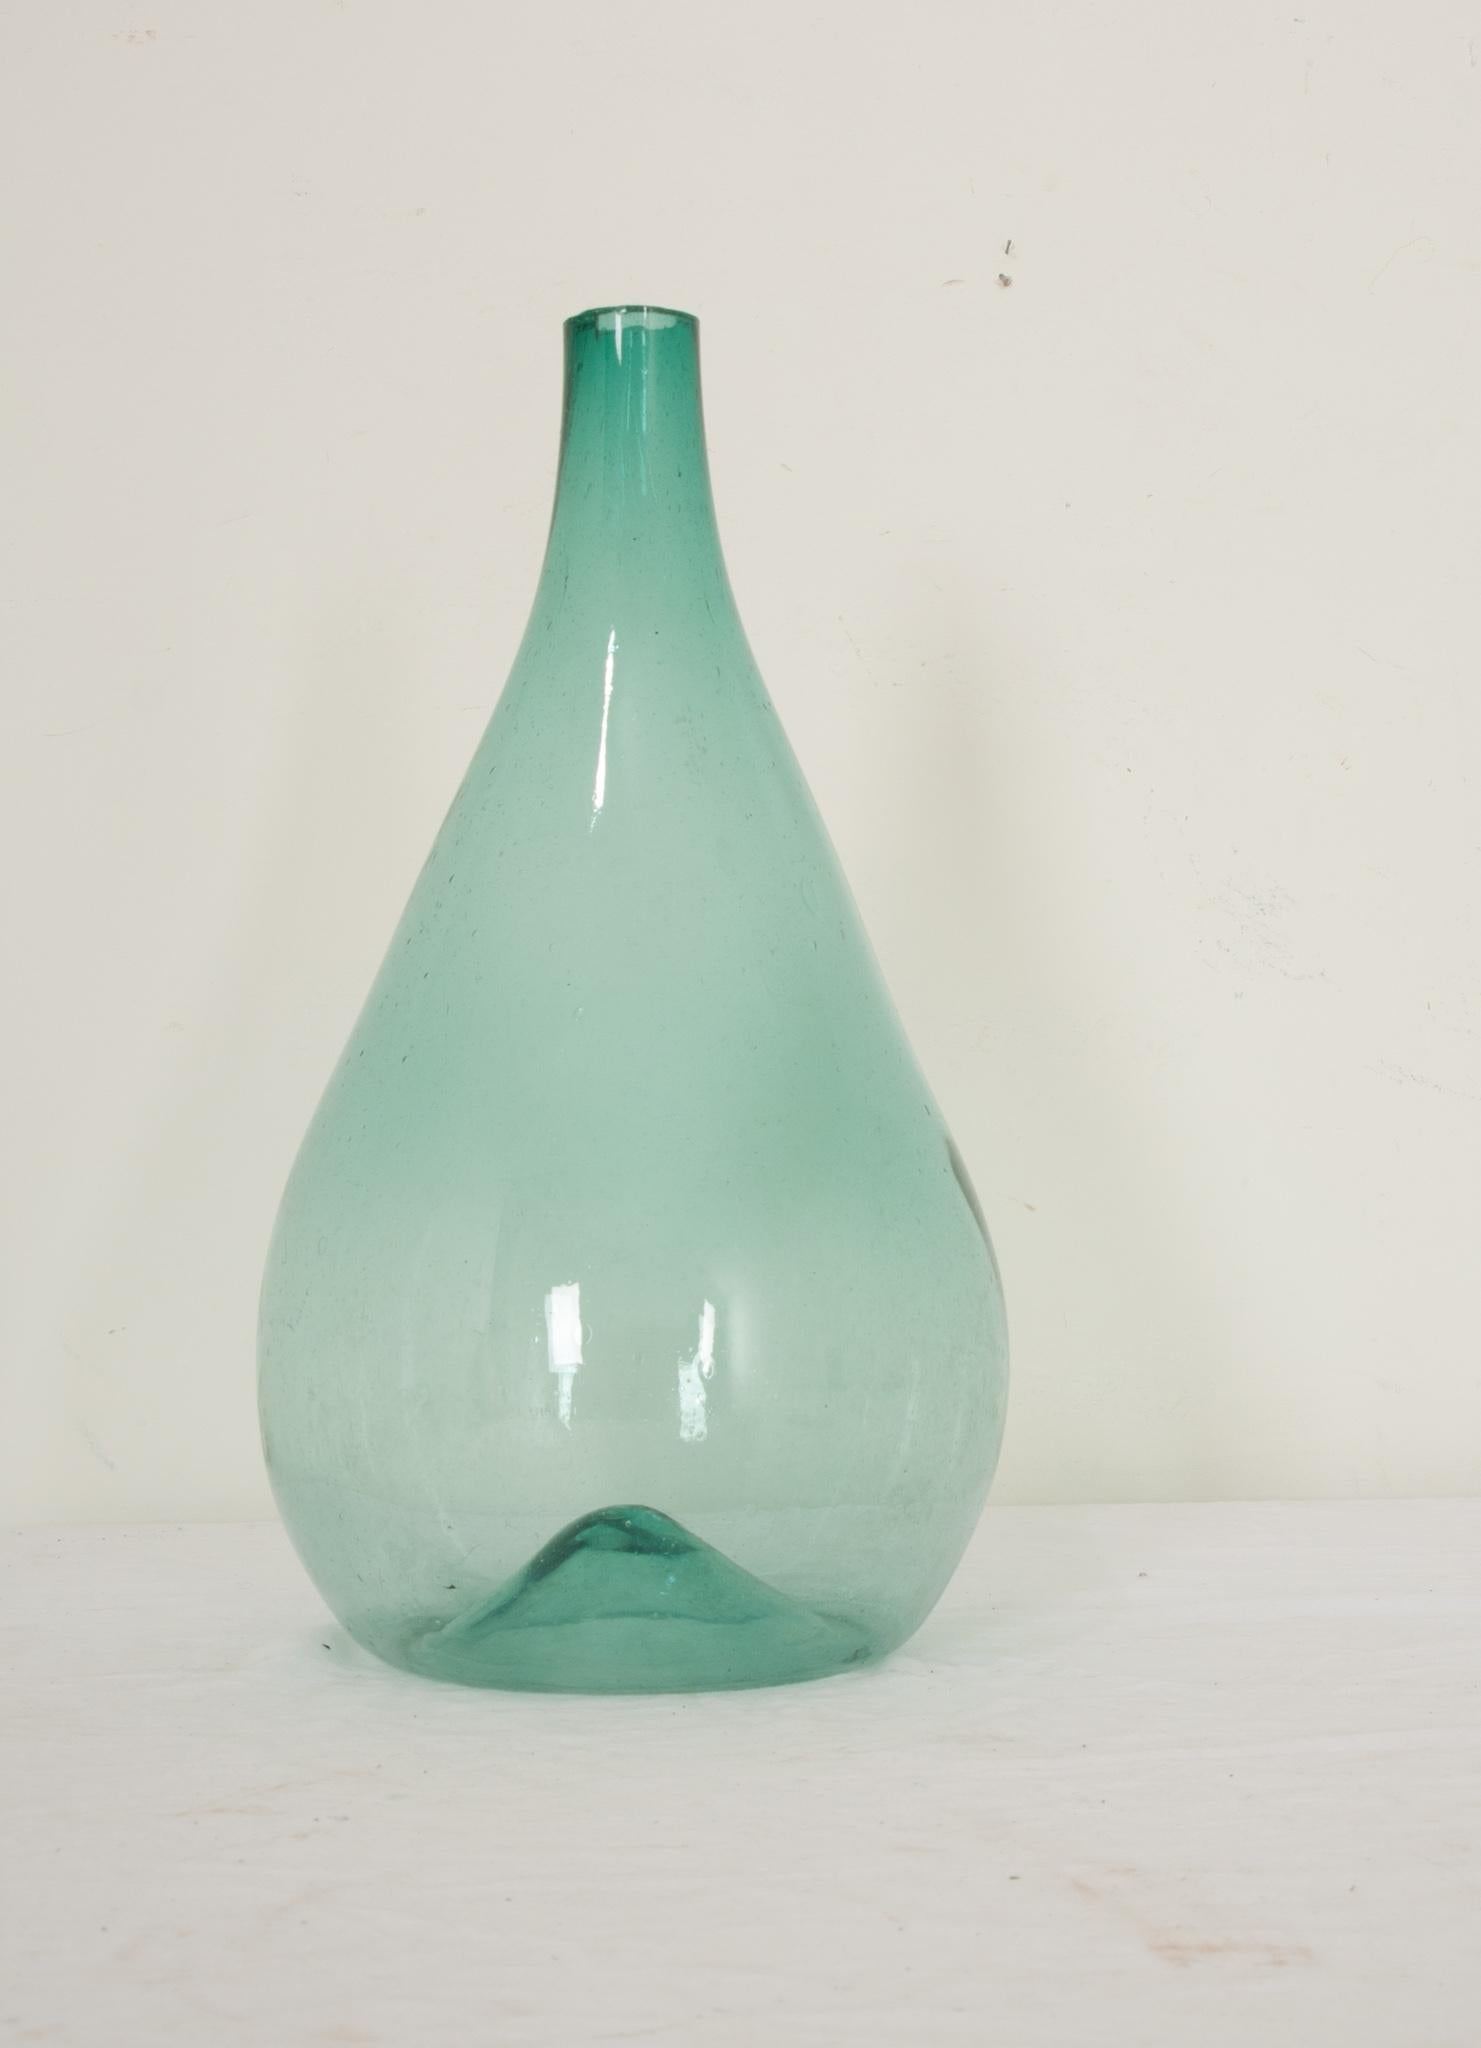 A rare Italian hand blown blue glass damigiana or demijohn hand-crafted in Italy circa 1800. Composed of a gorgeous free-blown aqua blue glass that exhibits trapped air bubbles within the glass and with a sheared lip. Its simply elegant form and